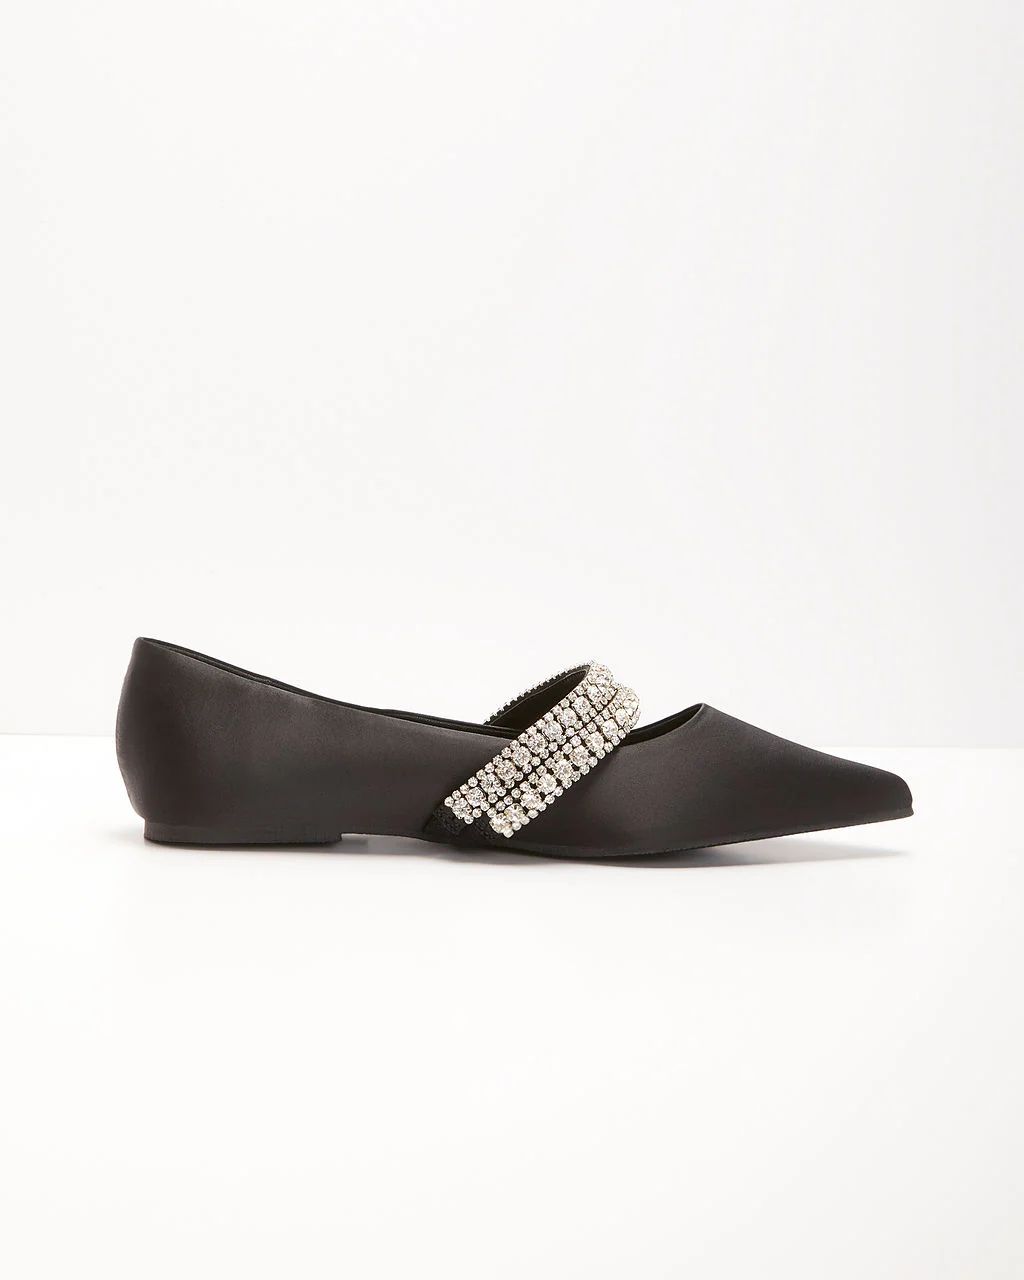 Spellbound Rhinestone Pointed Flats | VICI Collection